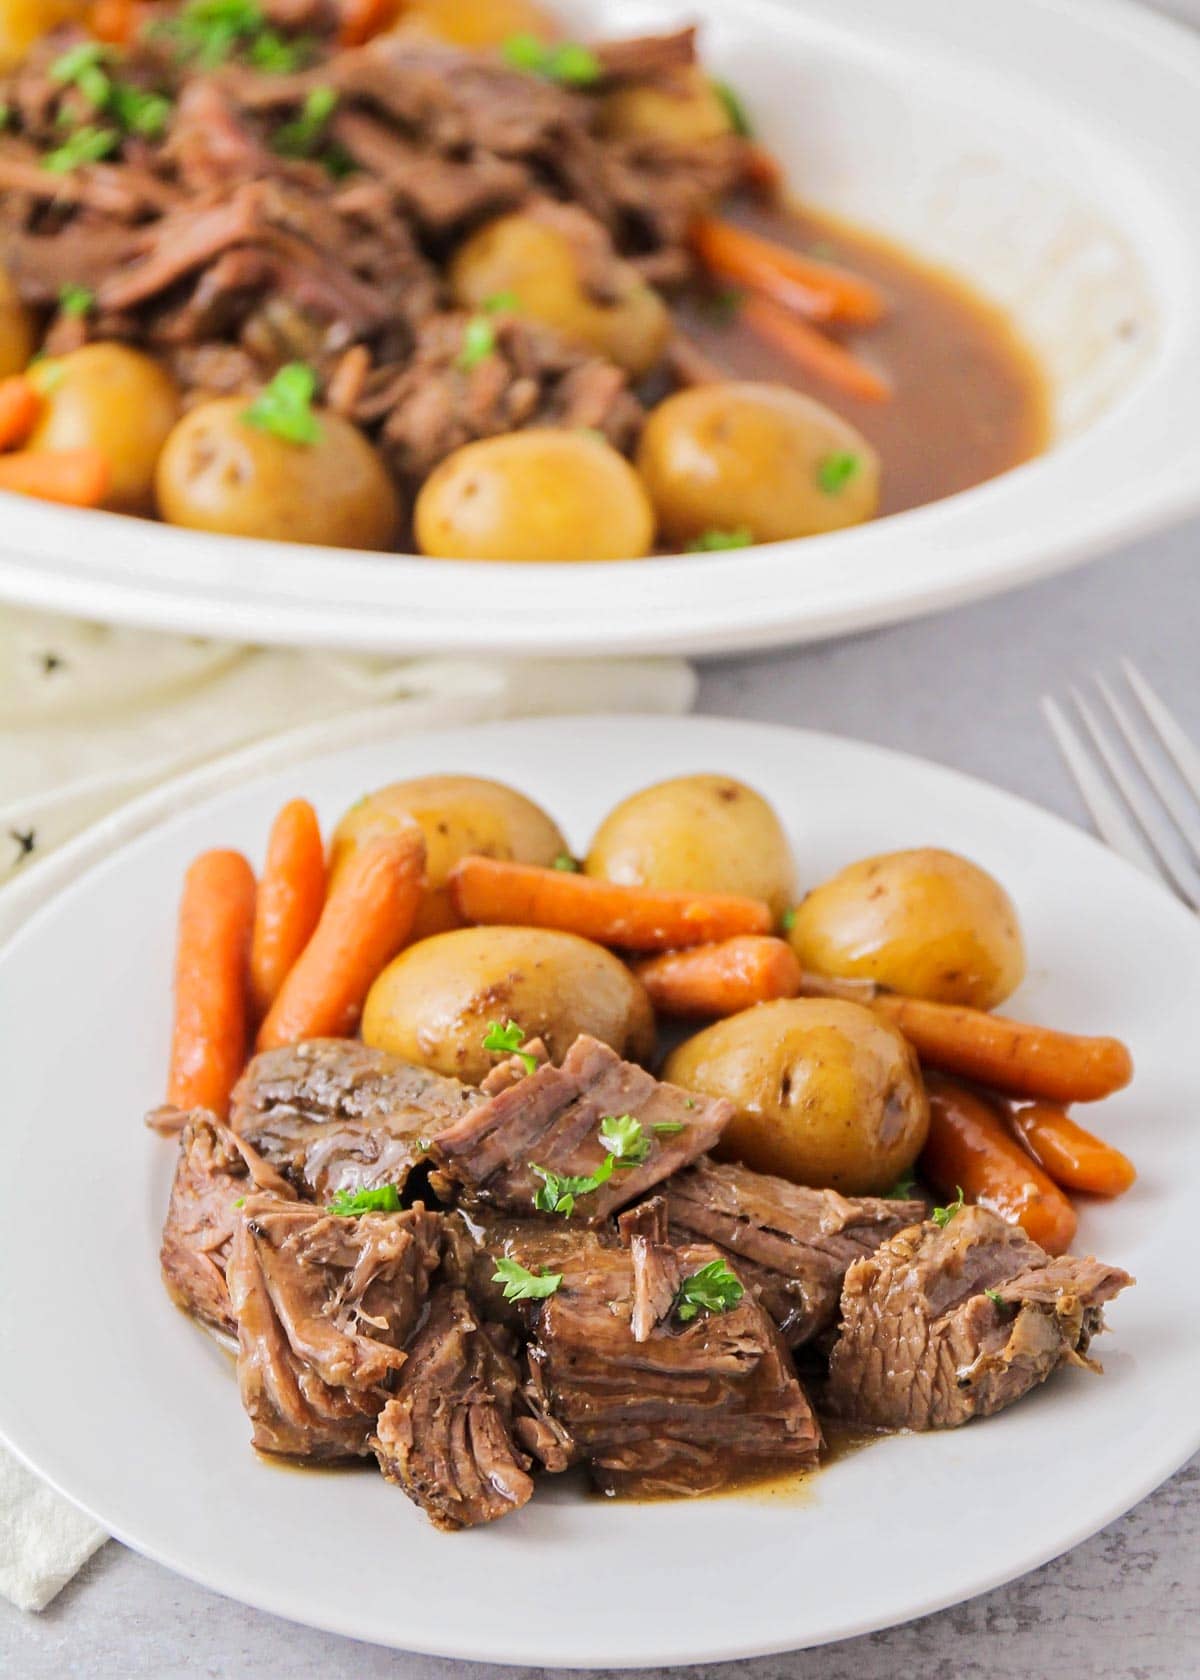 Serve oven roasted red potatoes with pot roast.